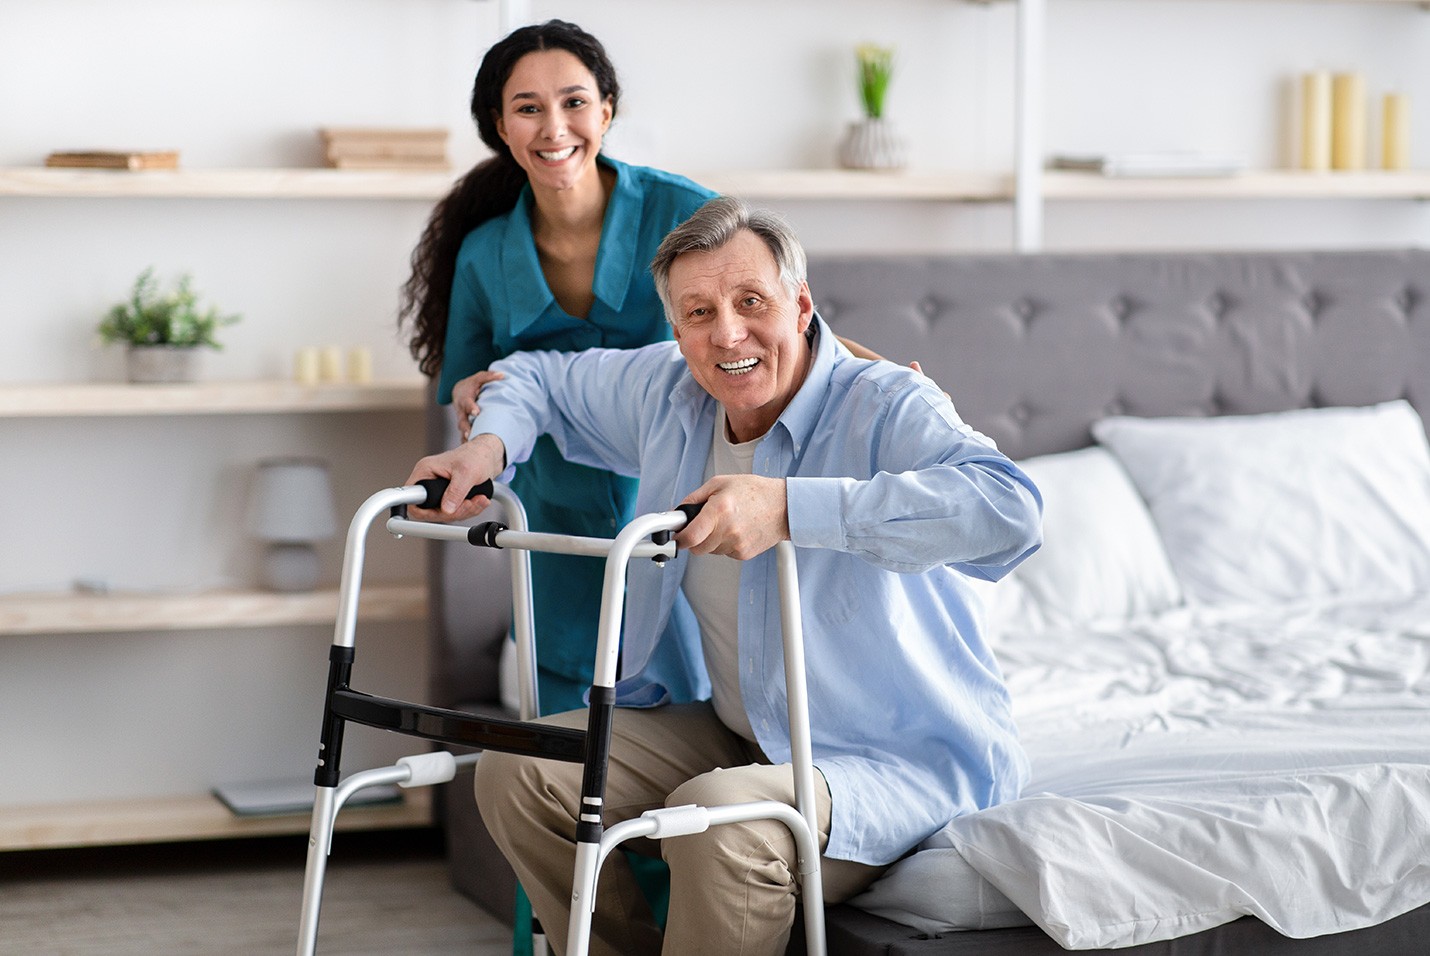 Home Care Agency vs. Registry: Is the Price Difference Worth the Risk?